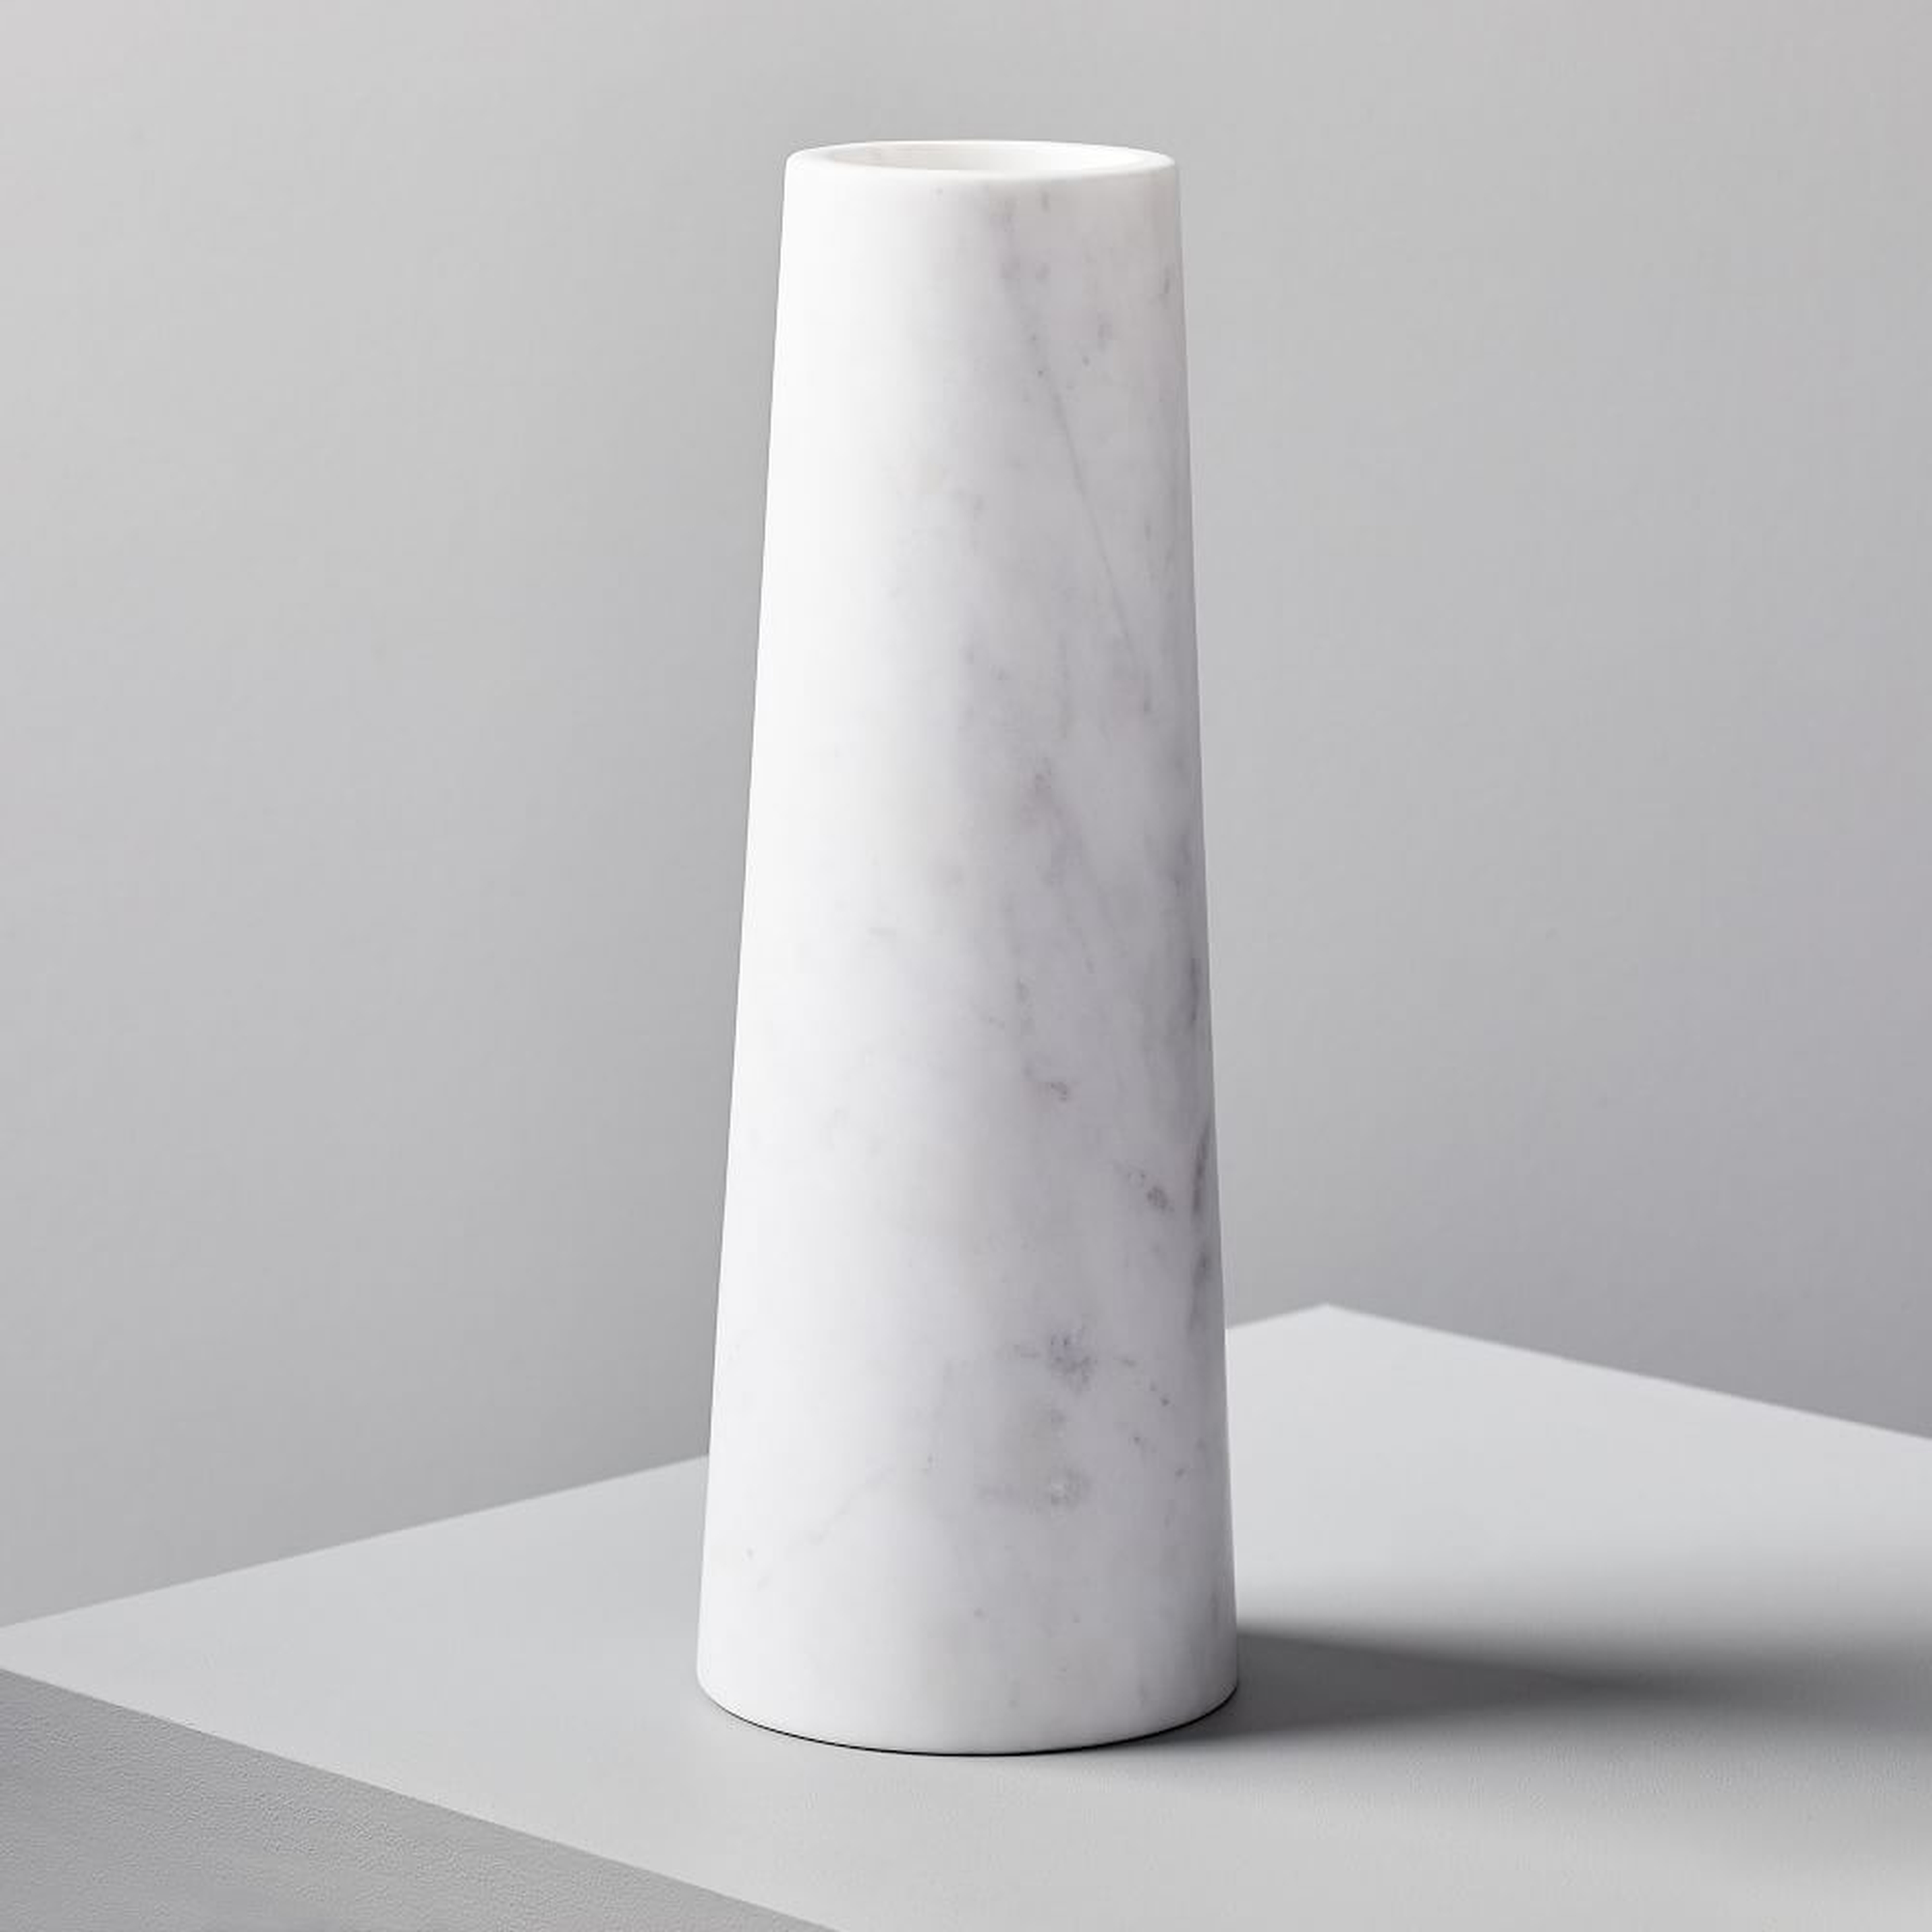 Foundations Marble Tapered Vase, White, 13" - West Elm